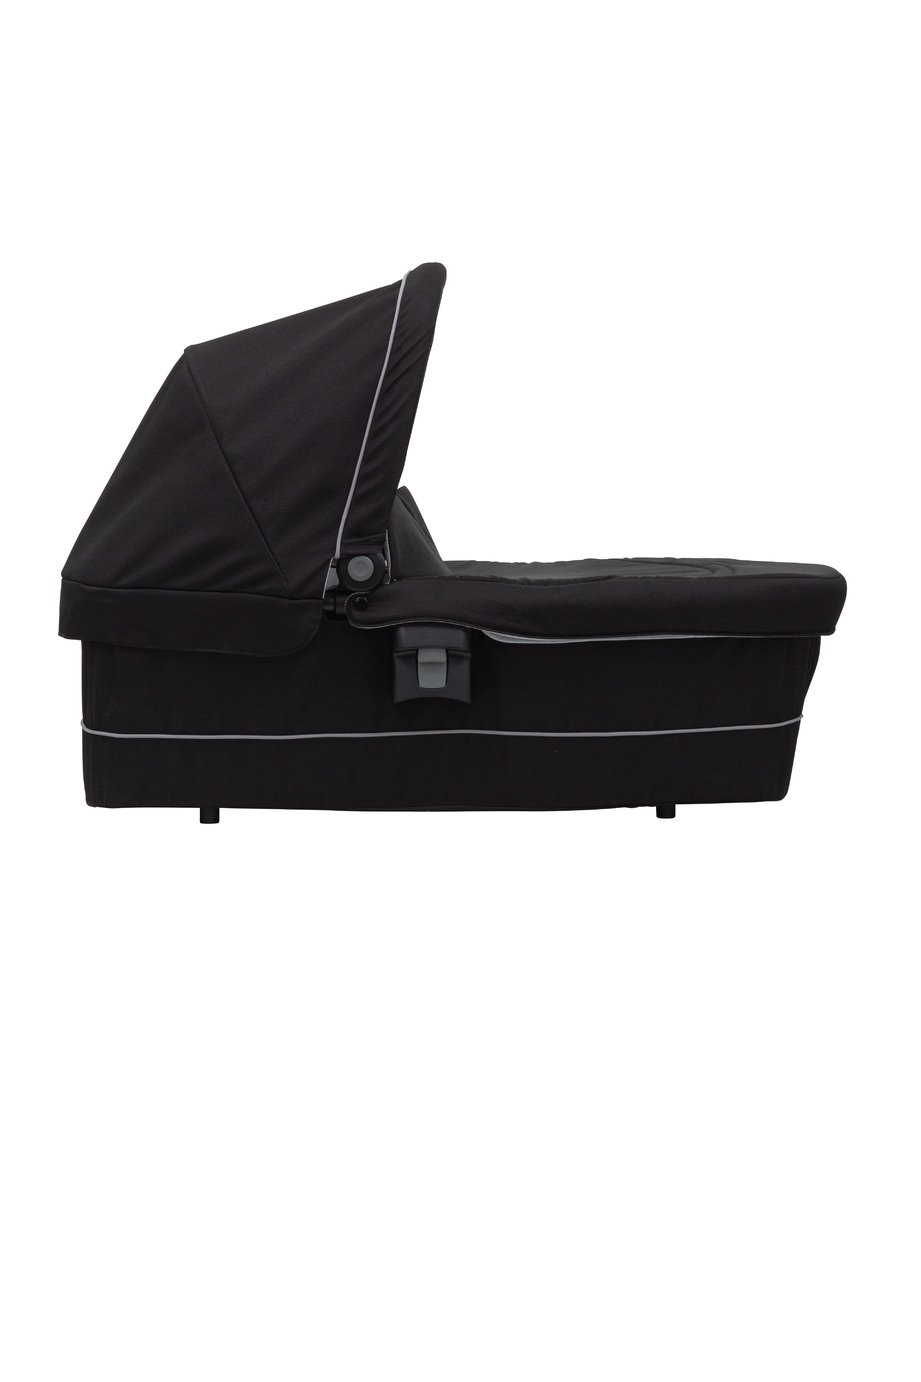 Graco Time2Grow Carrycot Review